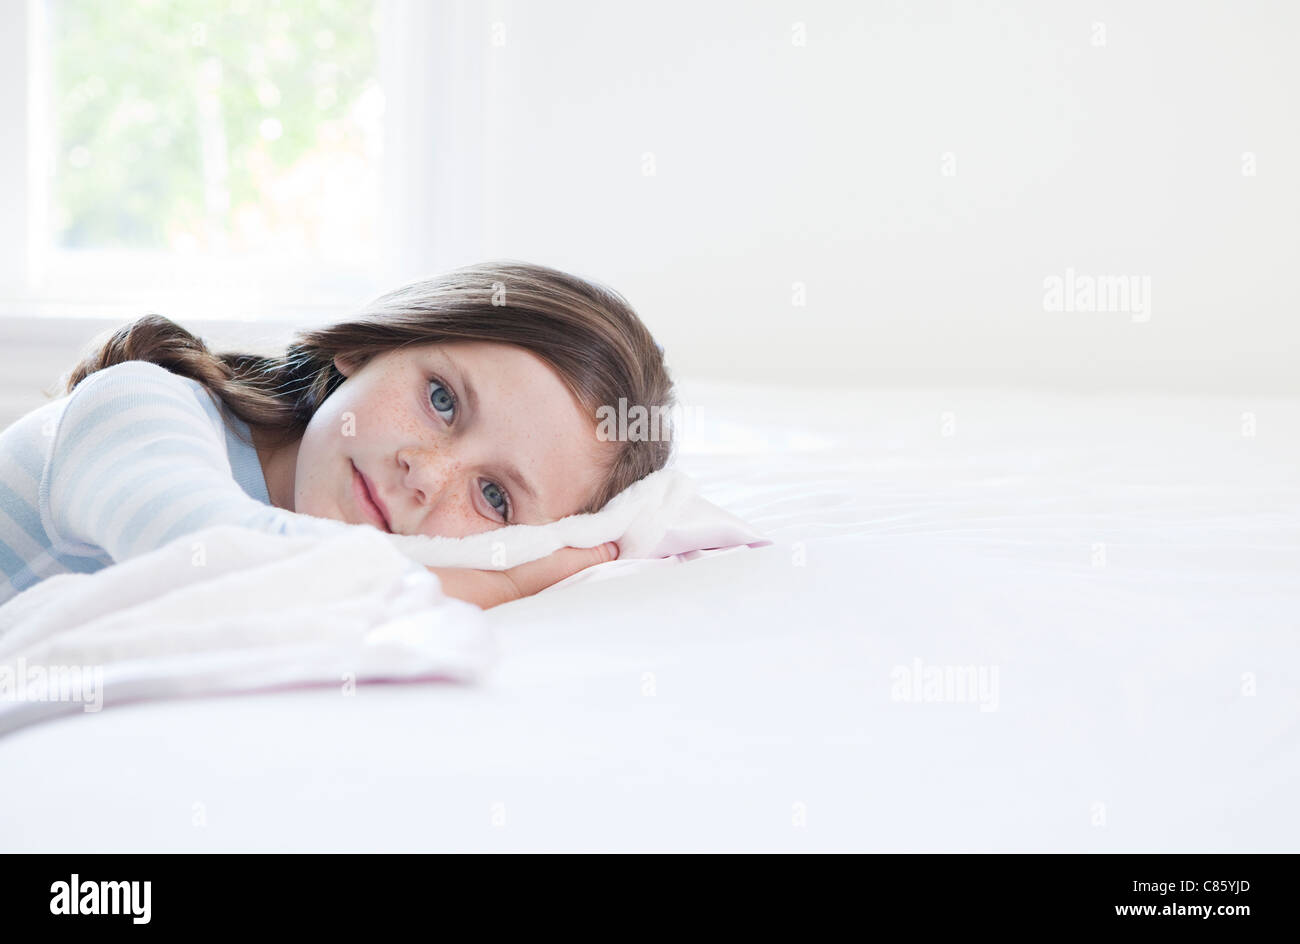 Little girl in her pajamas Stock Photo